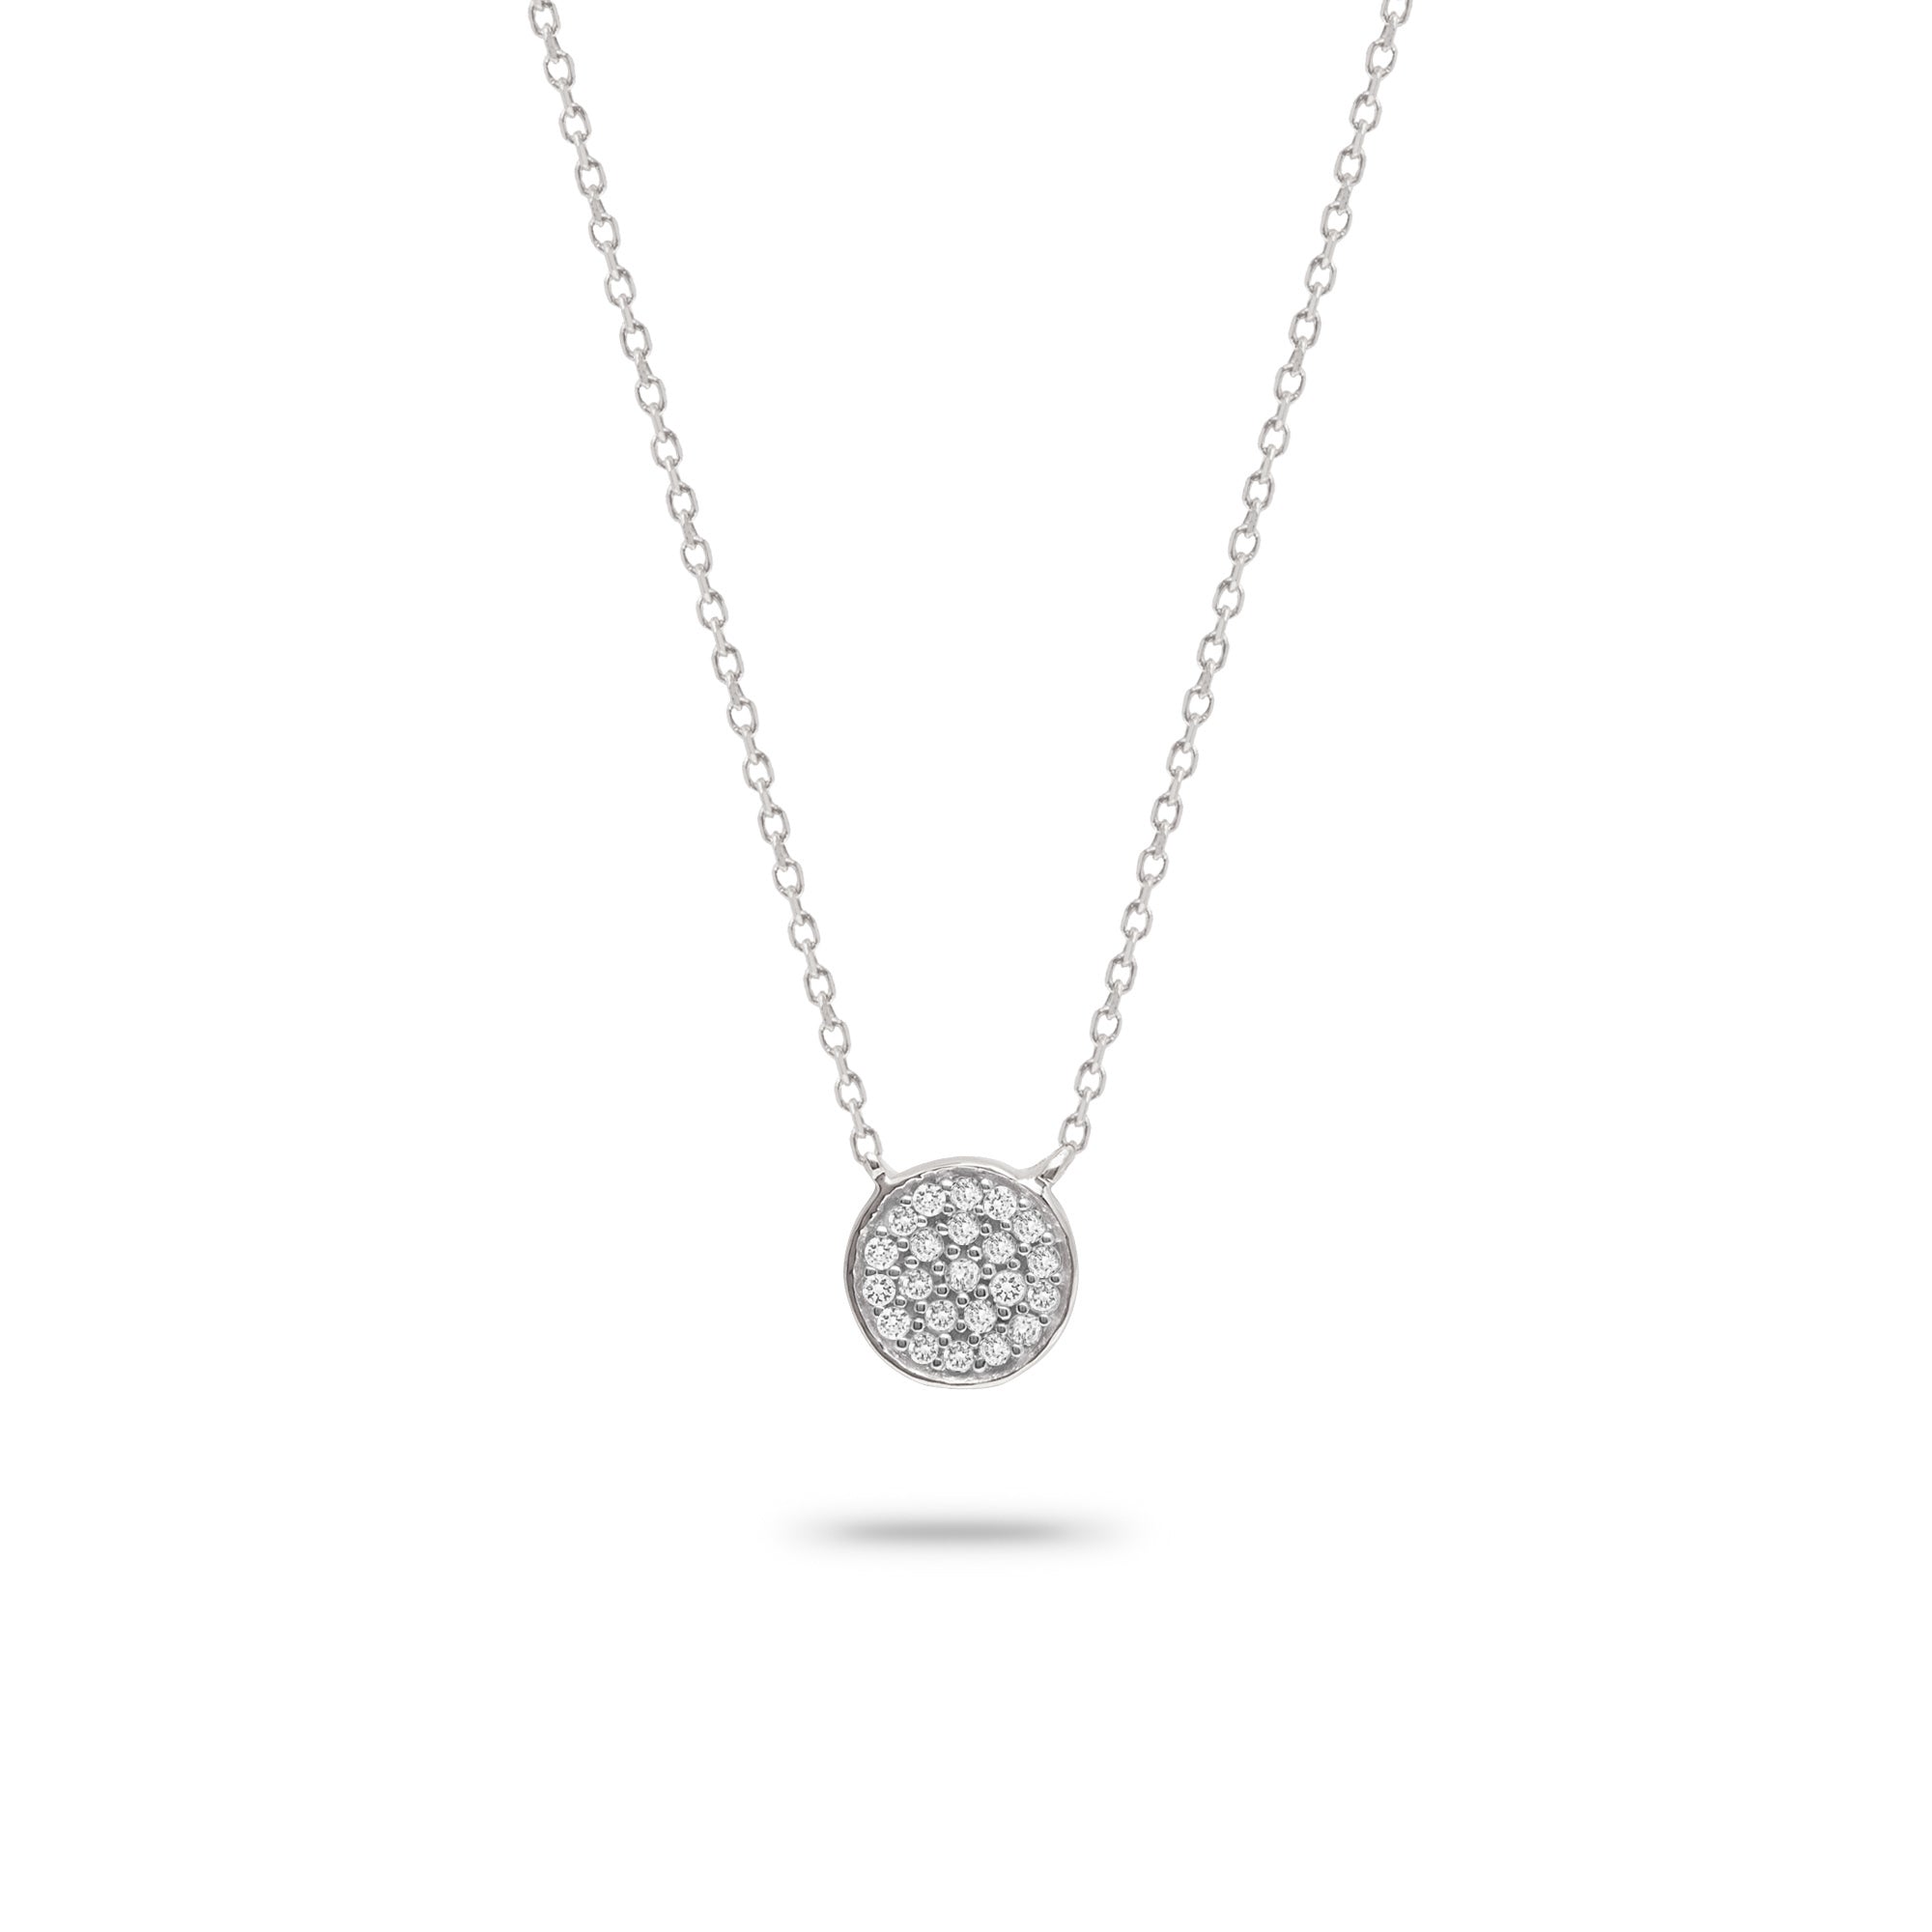 Solid Pavé Disc Necklace in Sterling Silver